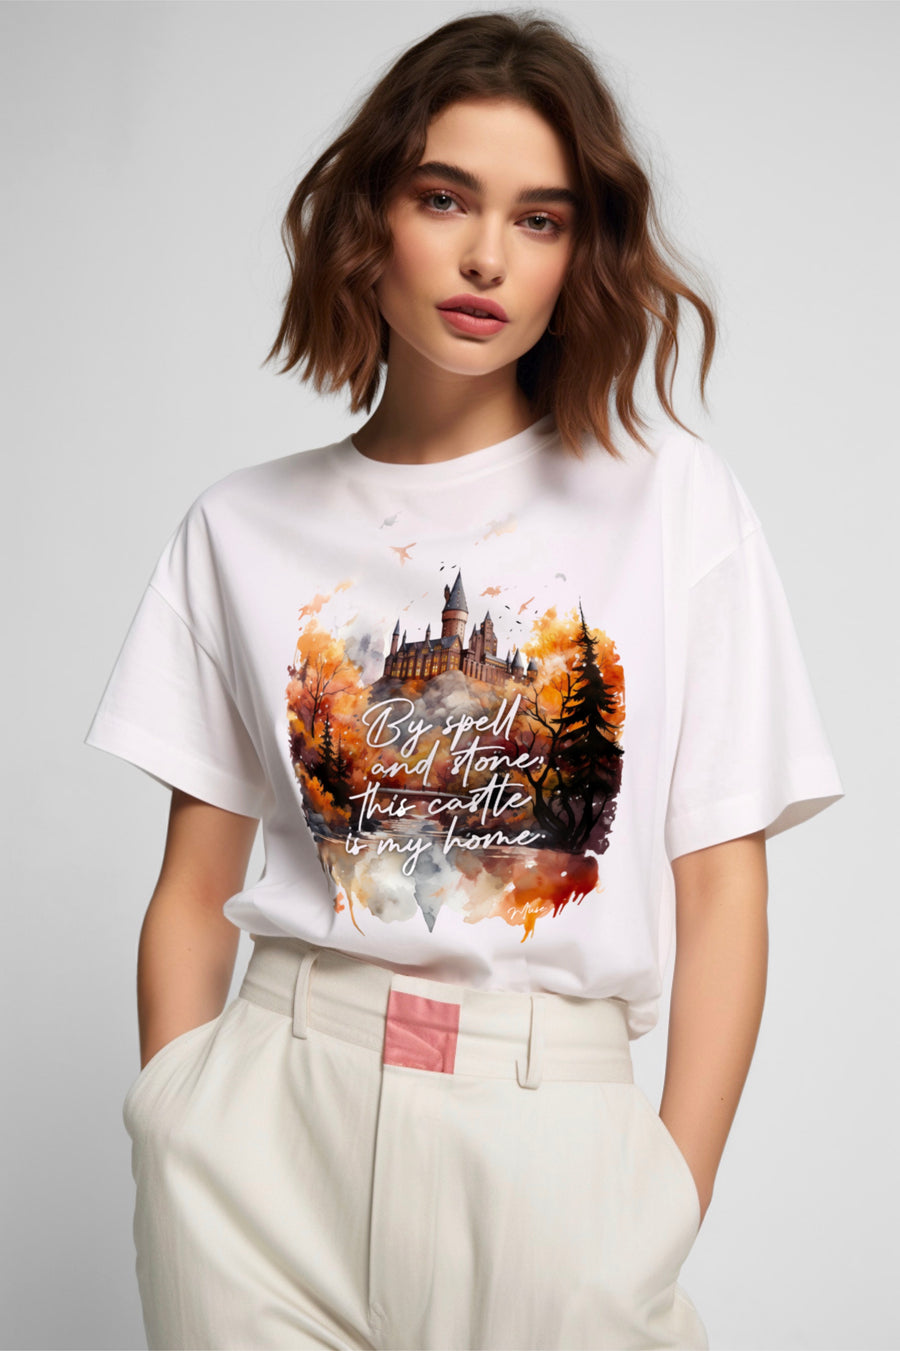 T-shirt | By spell and stone, this castle is my home.